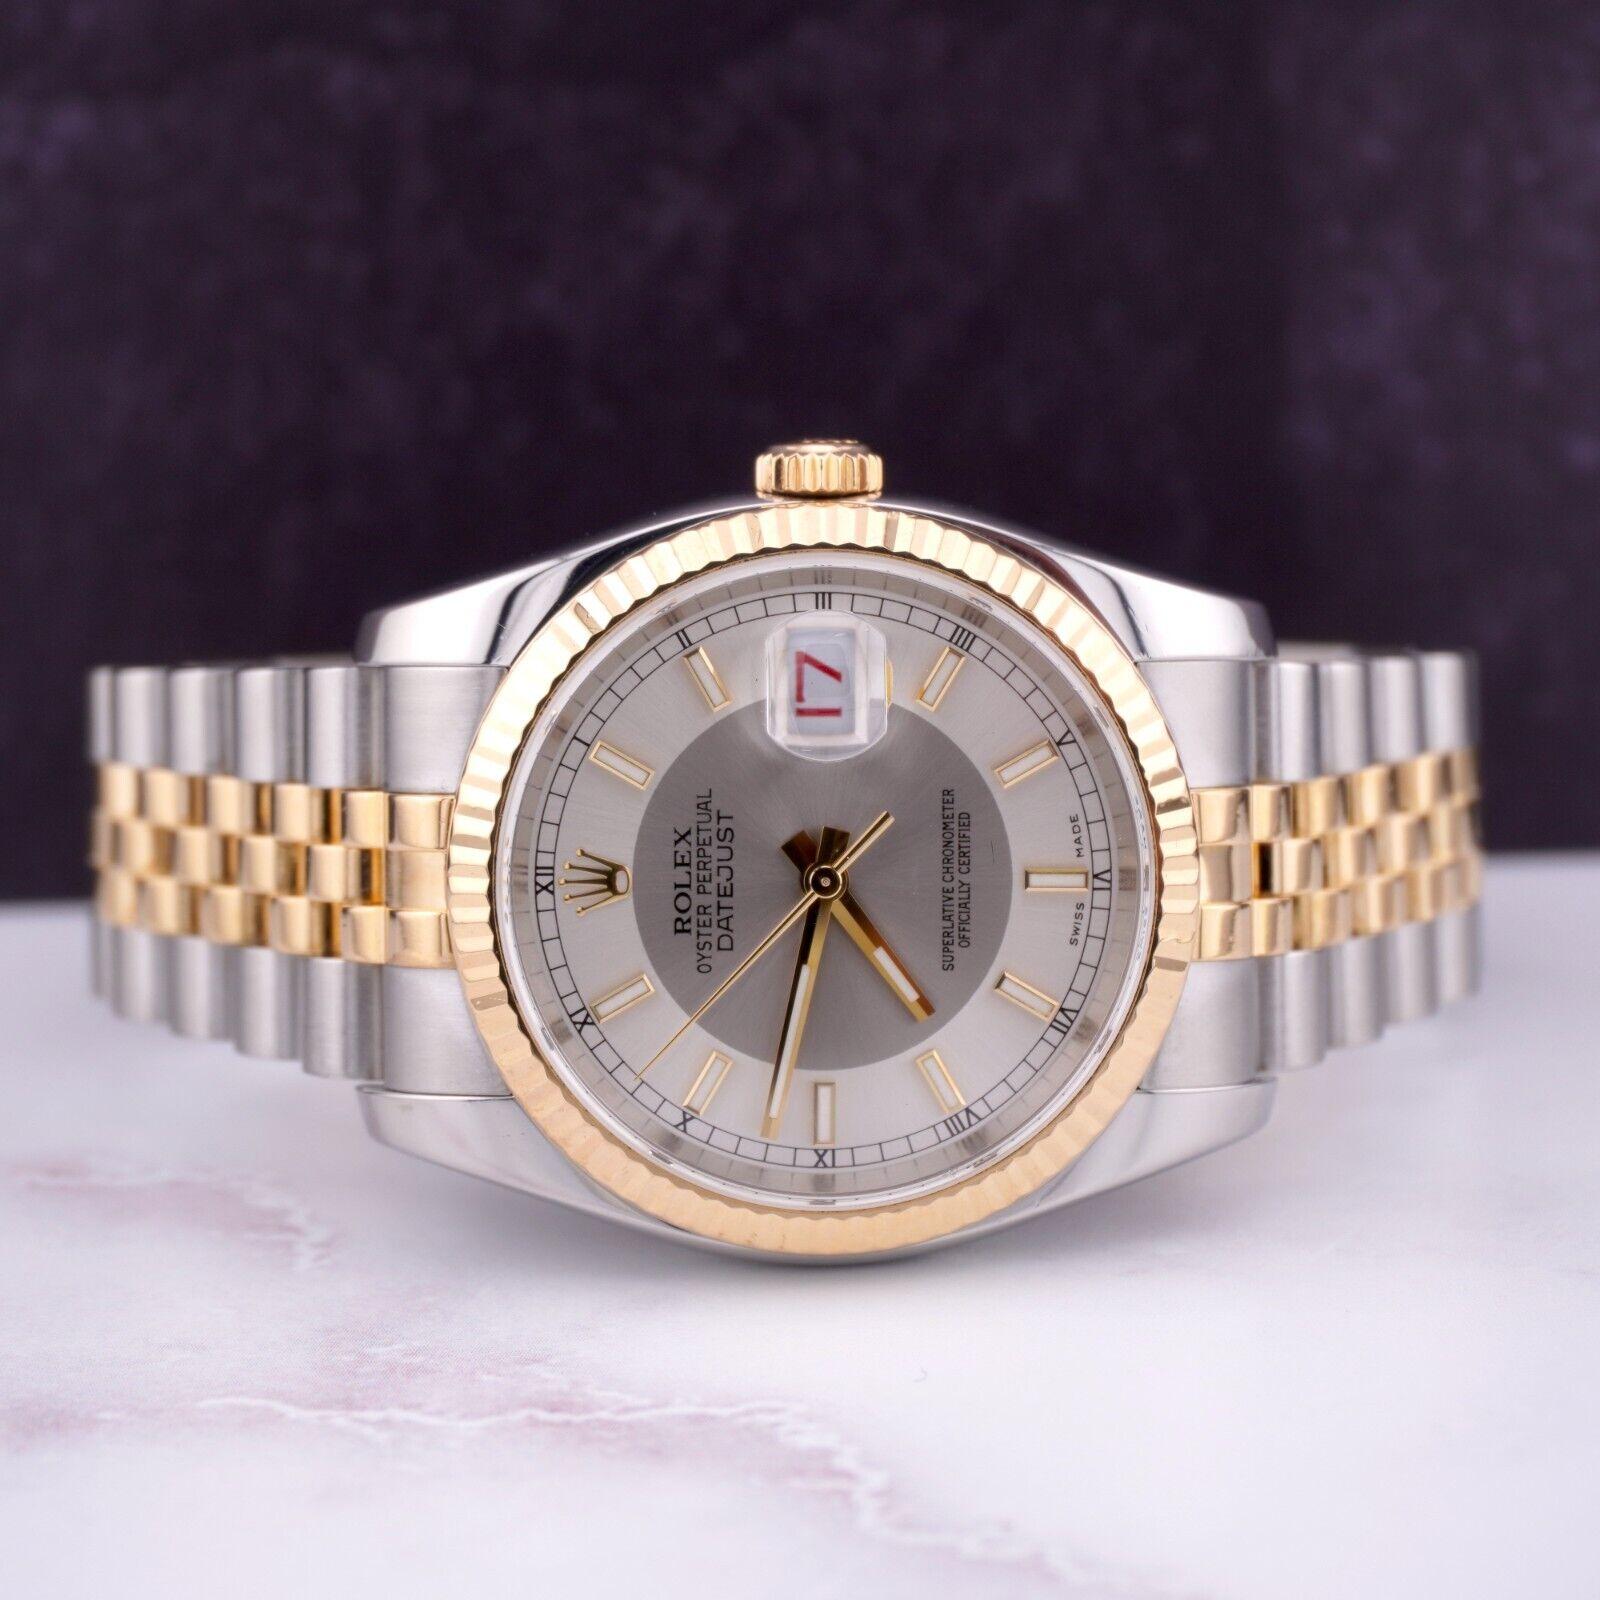 Rolex Datejust 36mm Watch. A Pre-owned watch w/ Gift Box. Watch is 100% Authentic and Comes with Authenticity Card. Watch Reference is 116233 and is in Excellent Condition (See Pictures). The dial color is Silver Tuxedo Dial. and material is